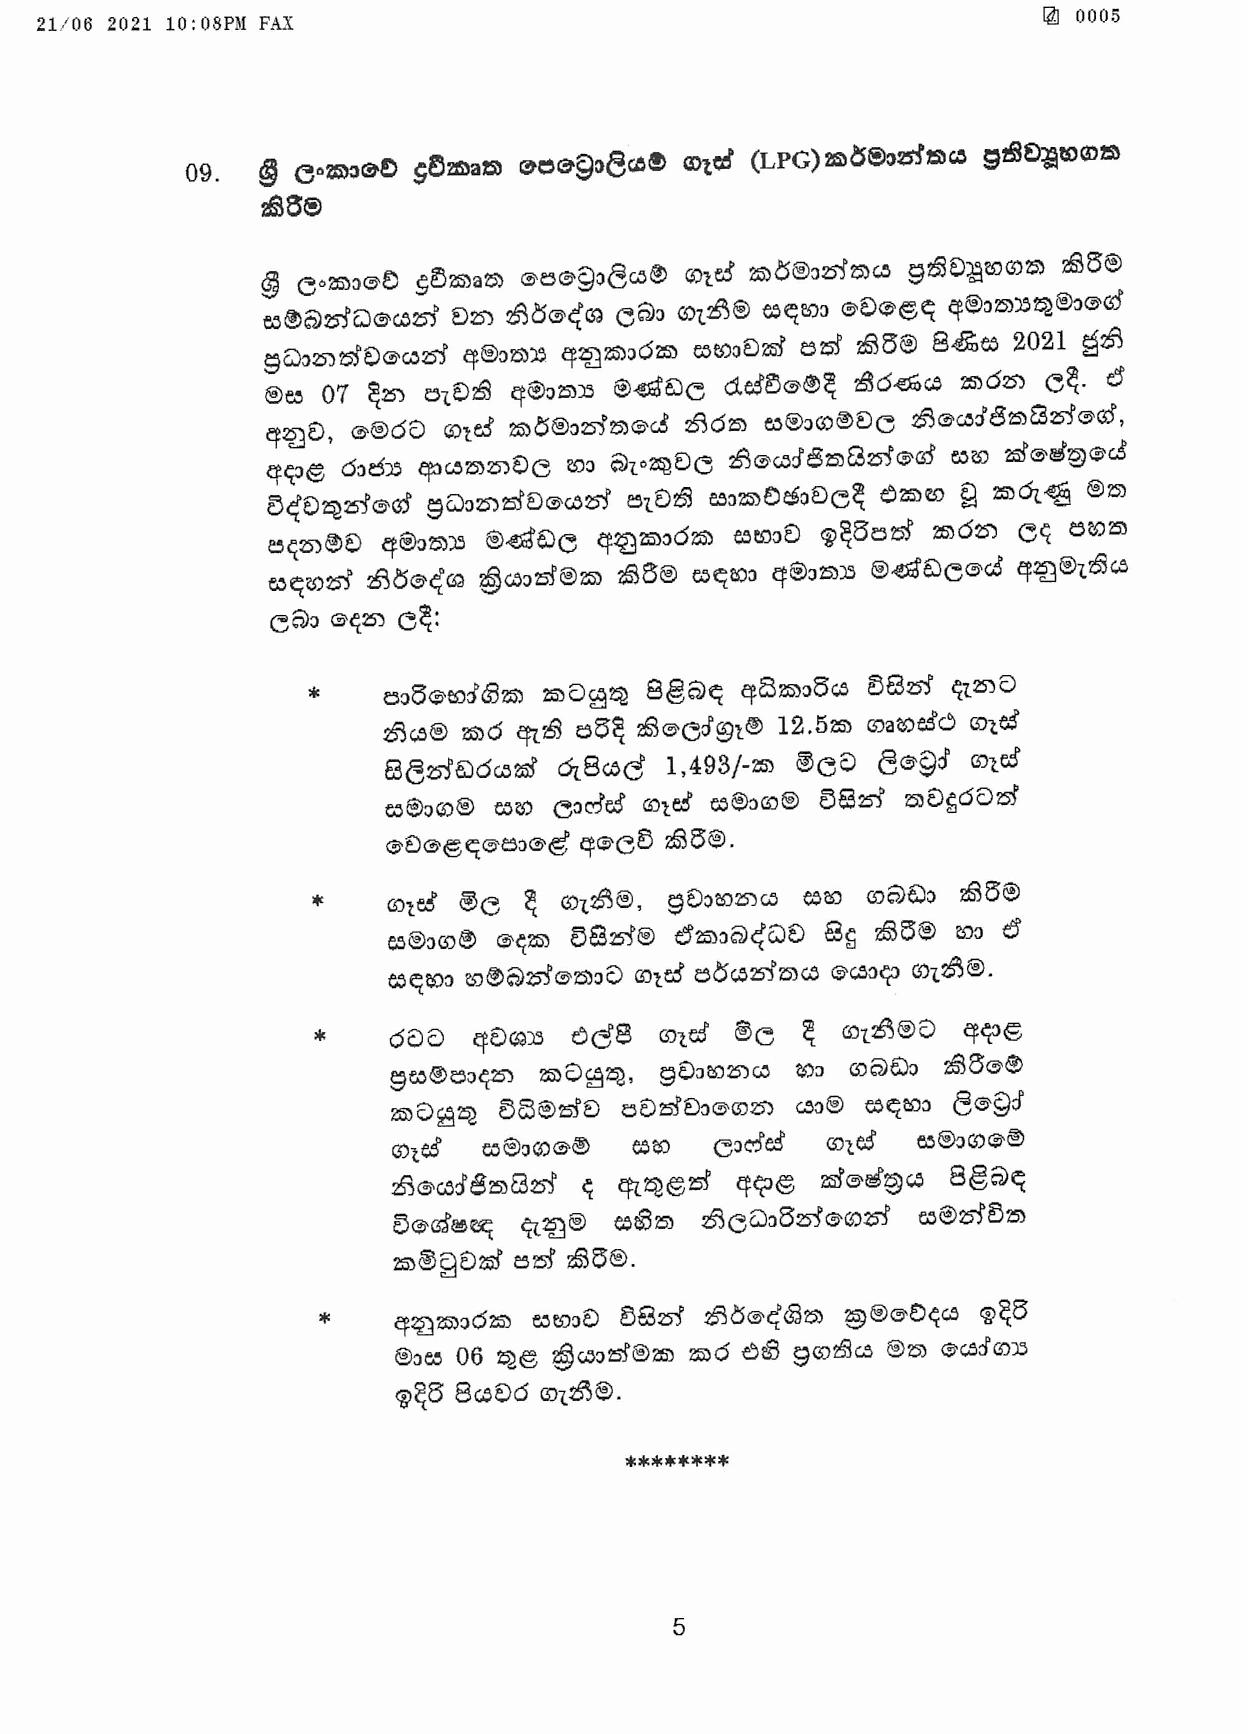 Cabinet Decision on 21.06.2021 page 005